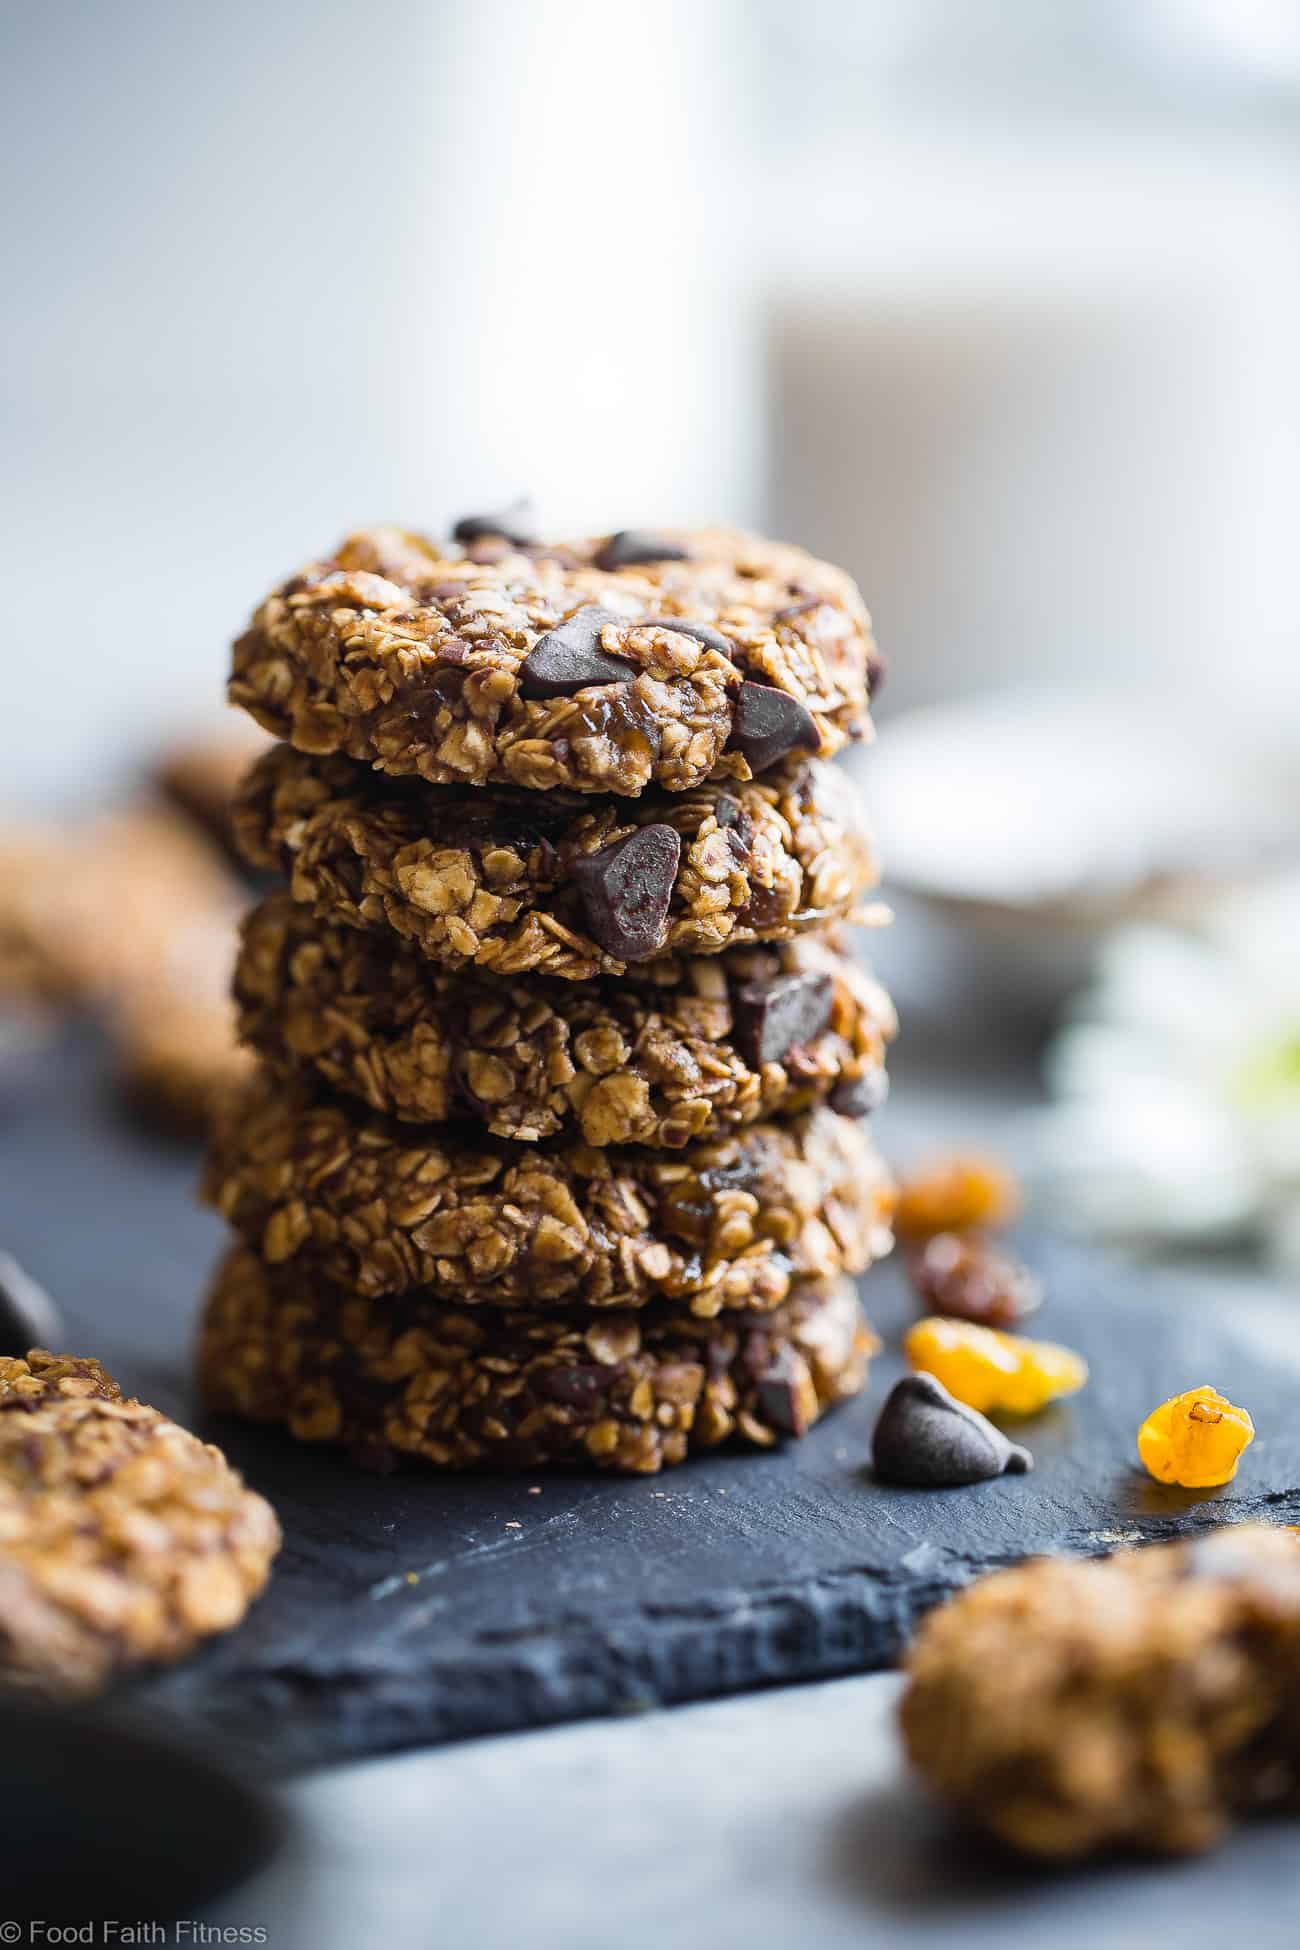 Vegan Gluten Free Oatmeal No Bake Cookies - These EASY, no bake oatmeal cookies have a surprise tahini twist, chocolate and notes of spicy cardamon and chewy golden raisins! A healthy, gluten/dairy/egg free treat for only 110 calories! | #Foodfaithfitness | #Vegan #NoBake #Healthy #ChocolateChip #Glutenfree